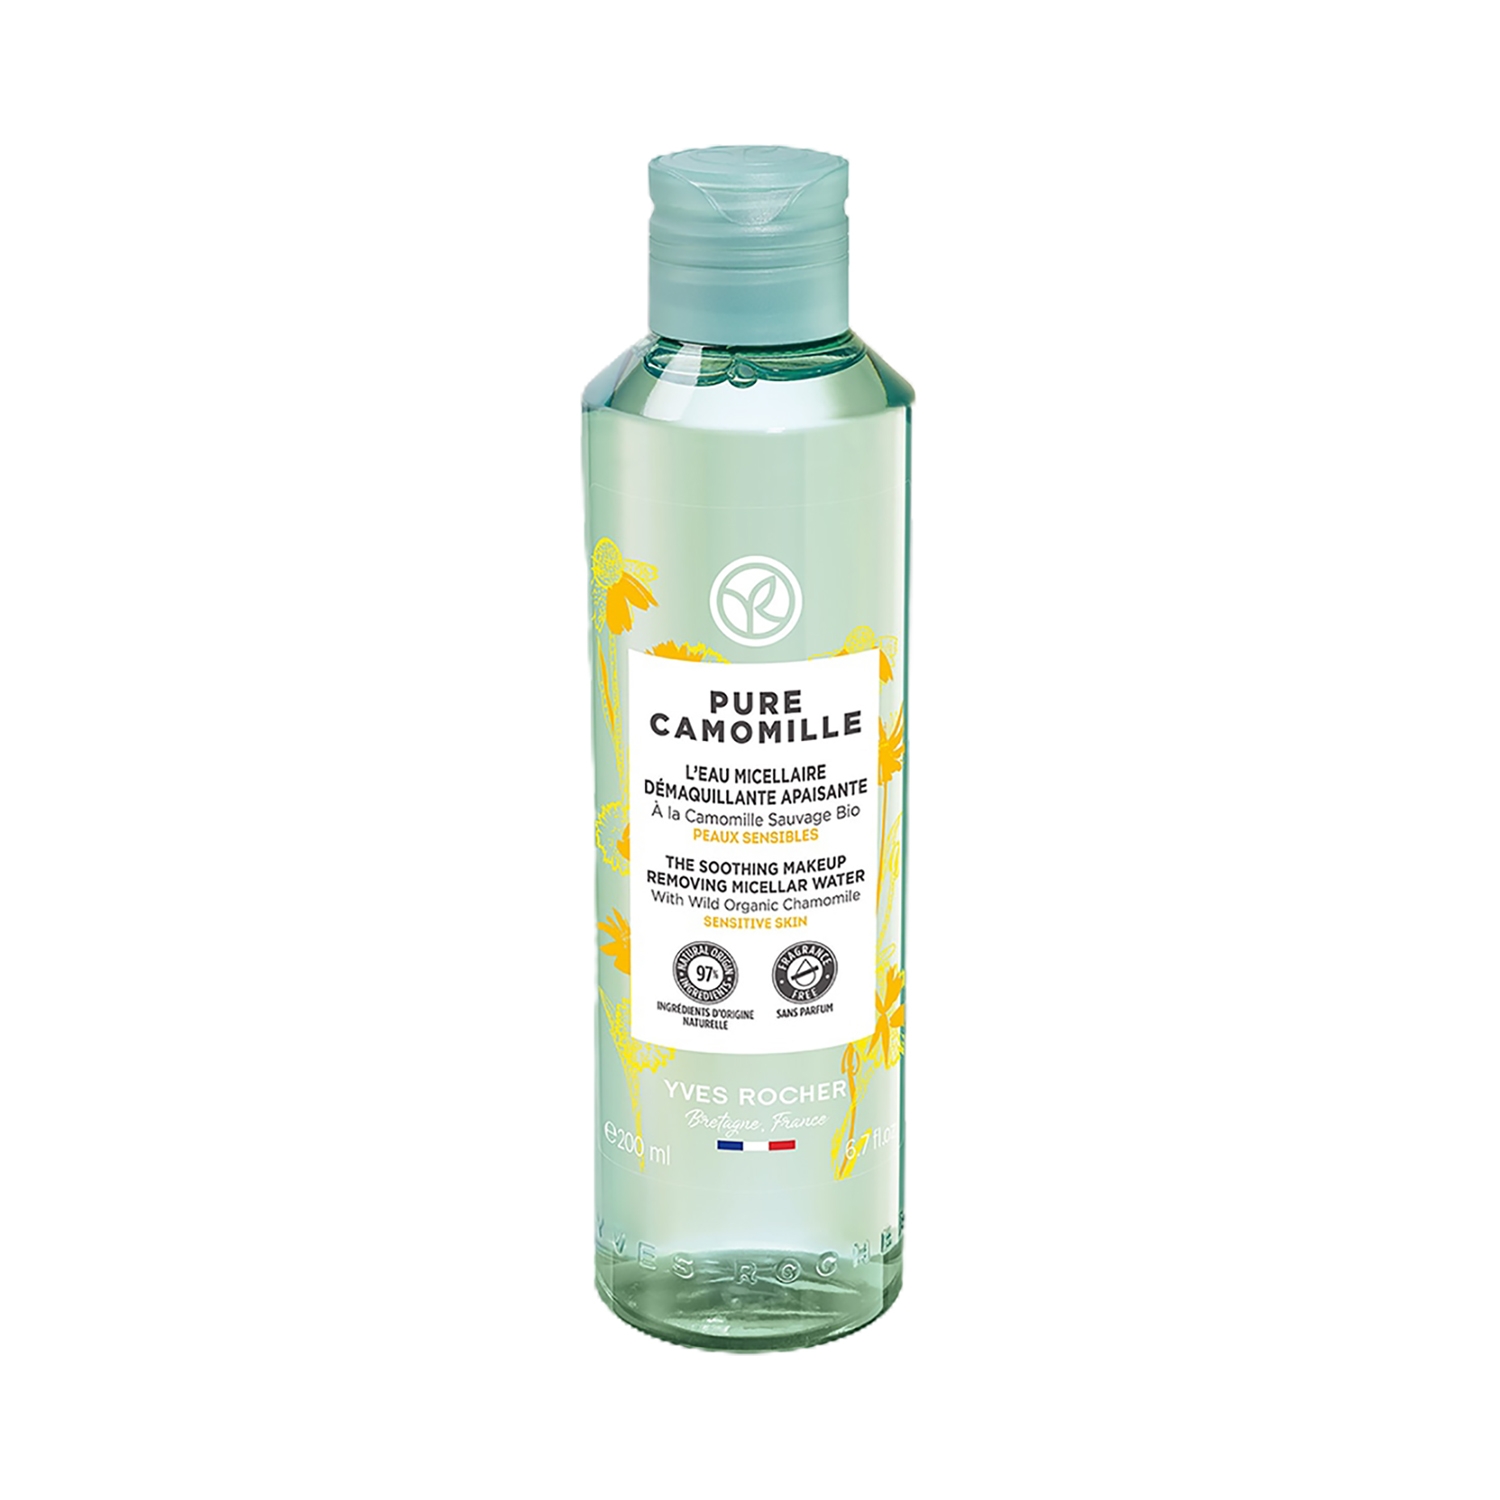 Yves Rocher Pure Camomille The Soothing Makeup Removing Micellar Water (200ml)